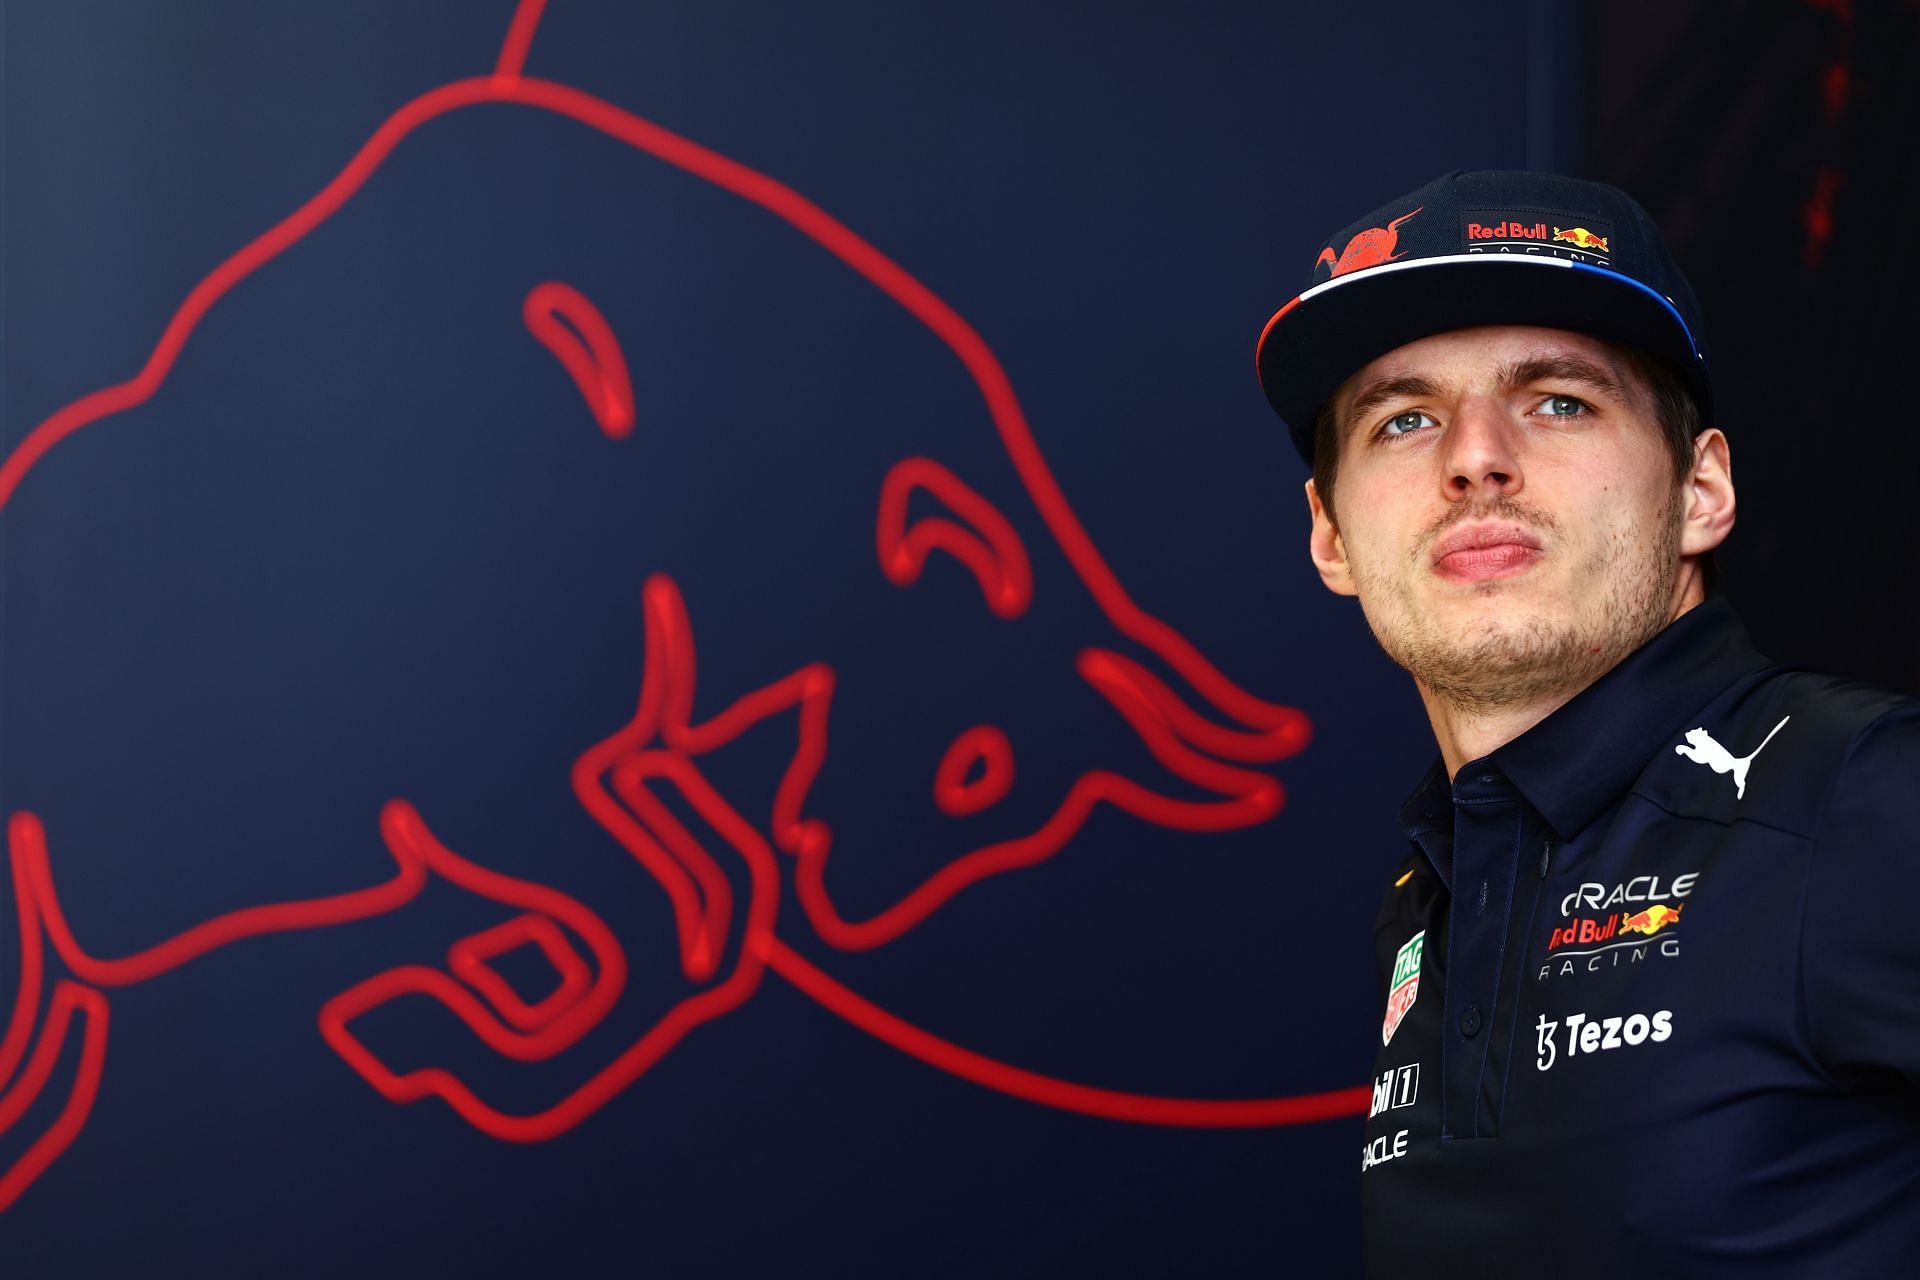 Max Verstappen during the F1 Grand Prix of Bahrain